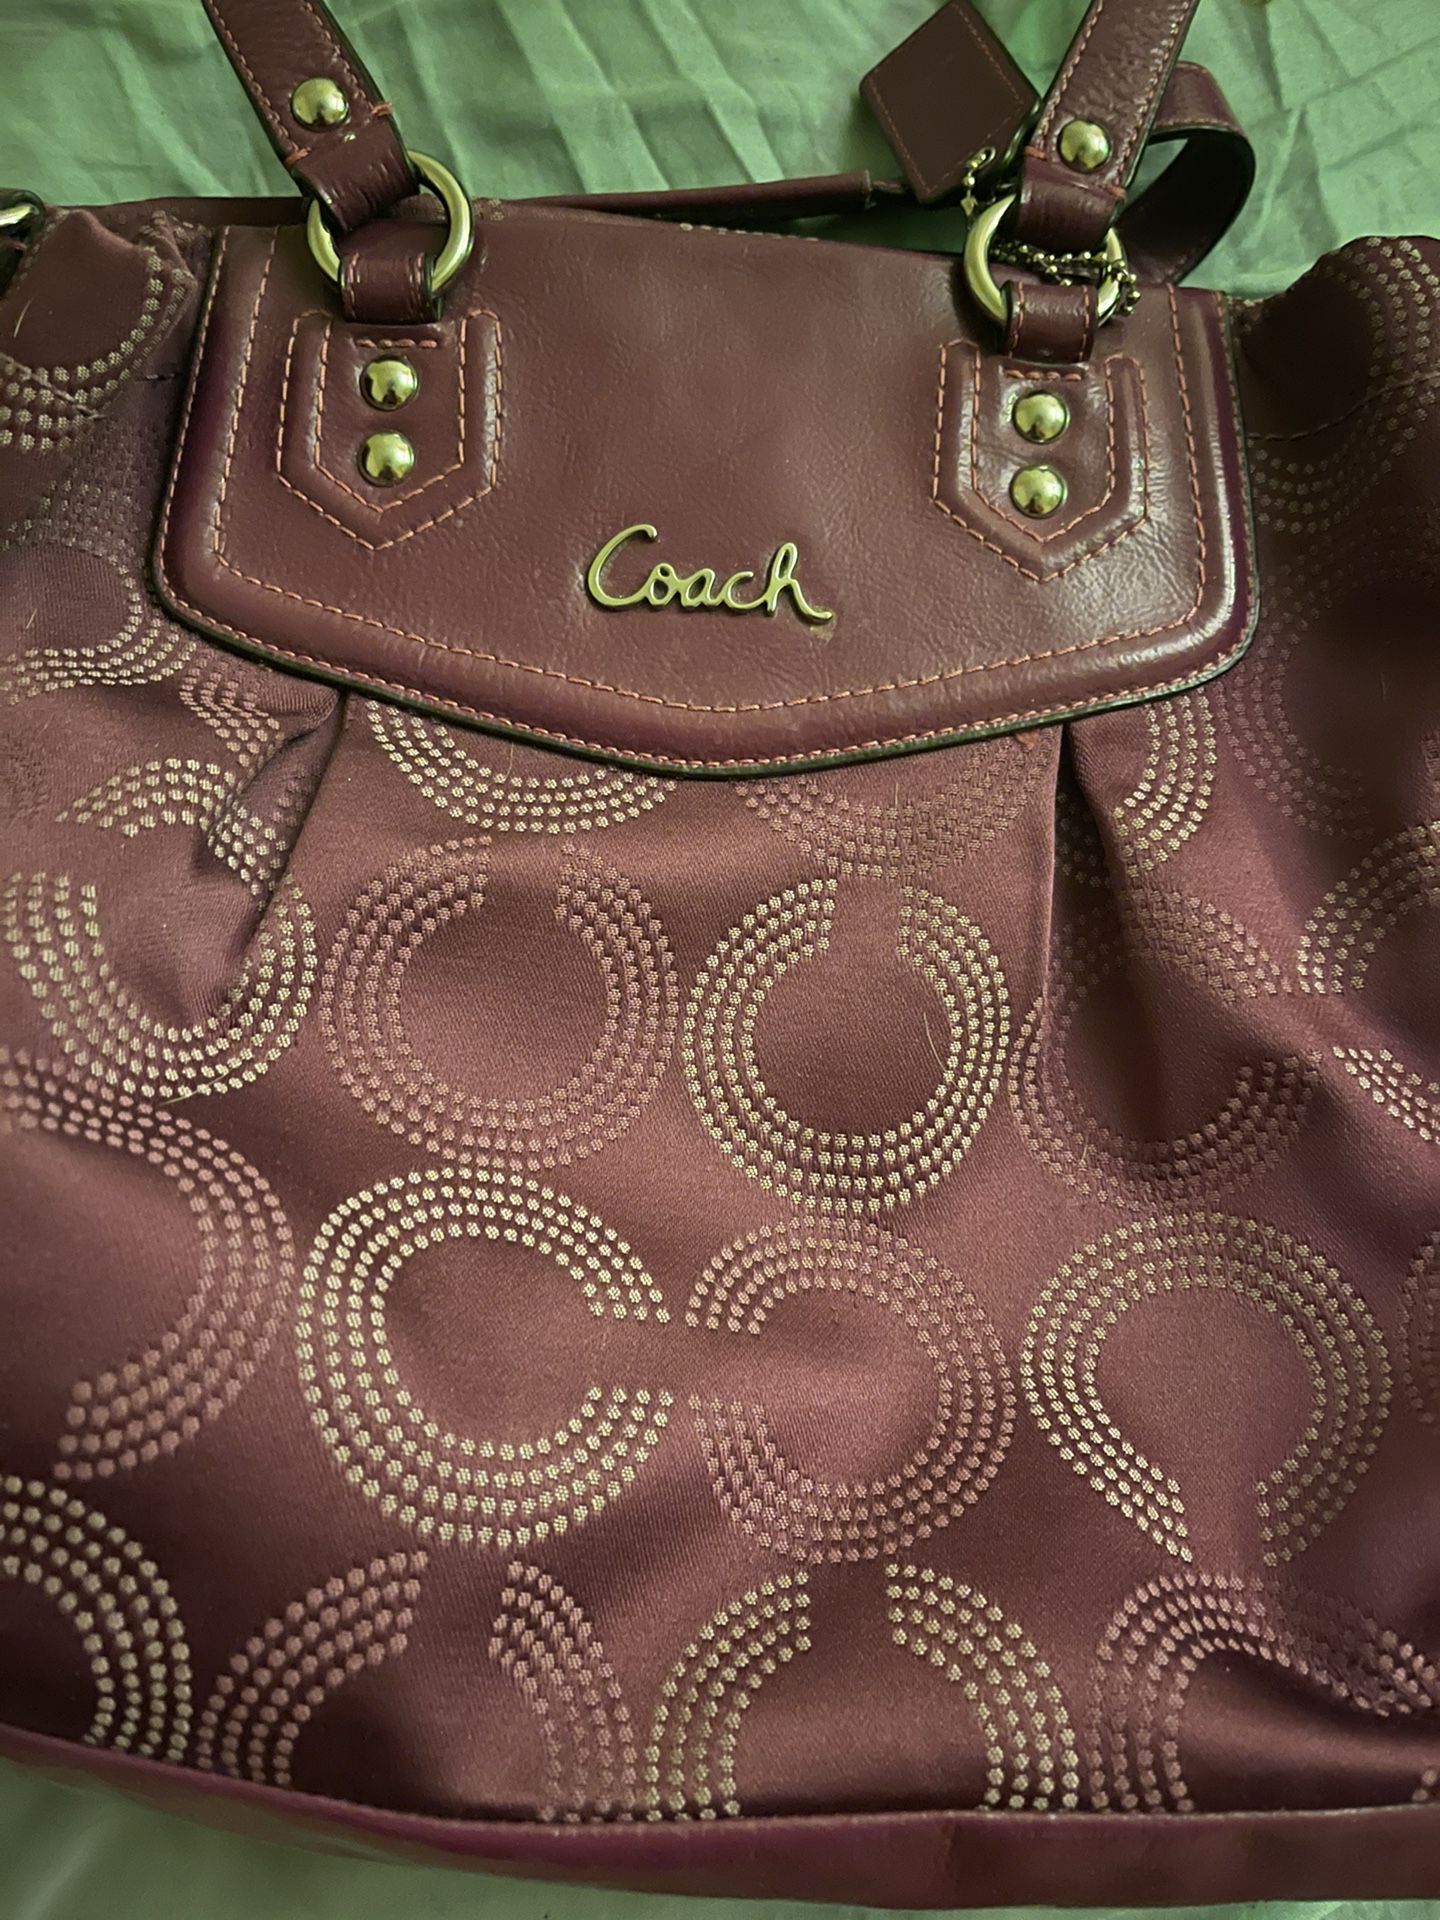 Coach Bag Barely Used 